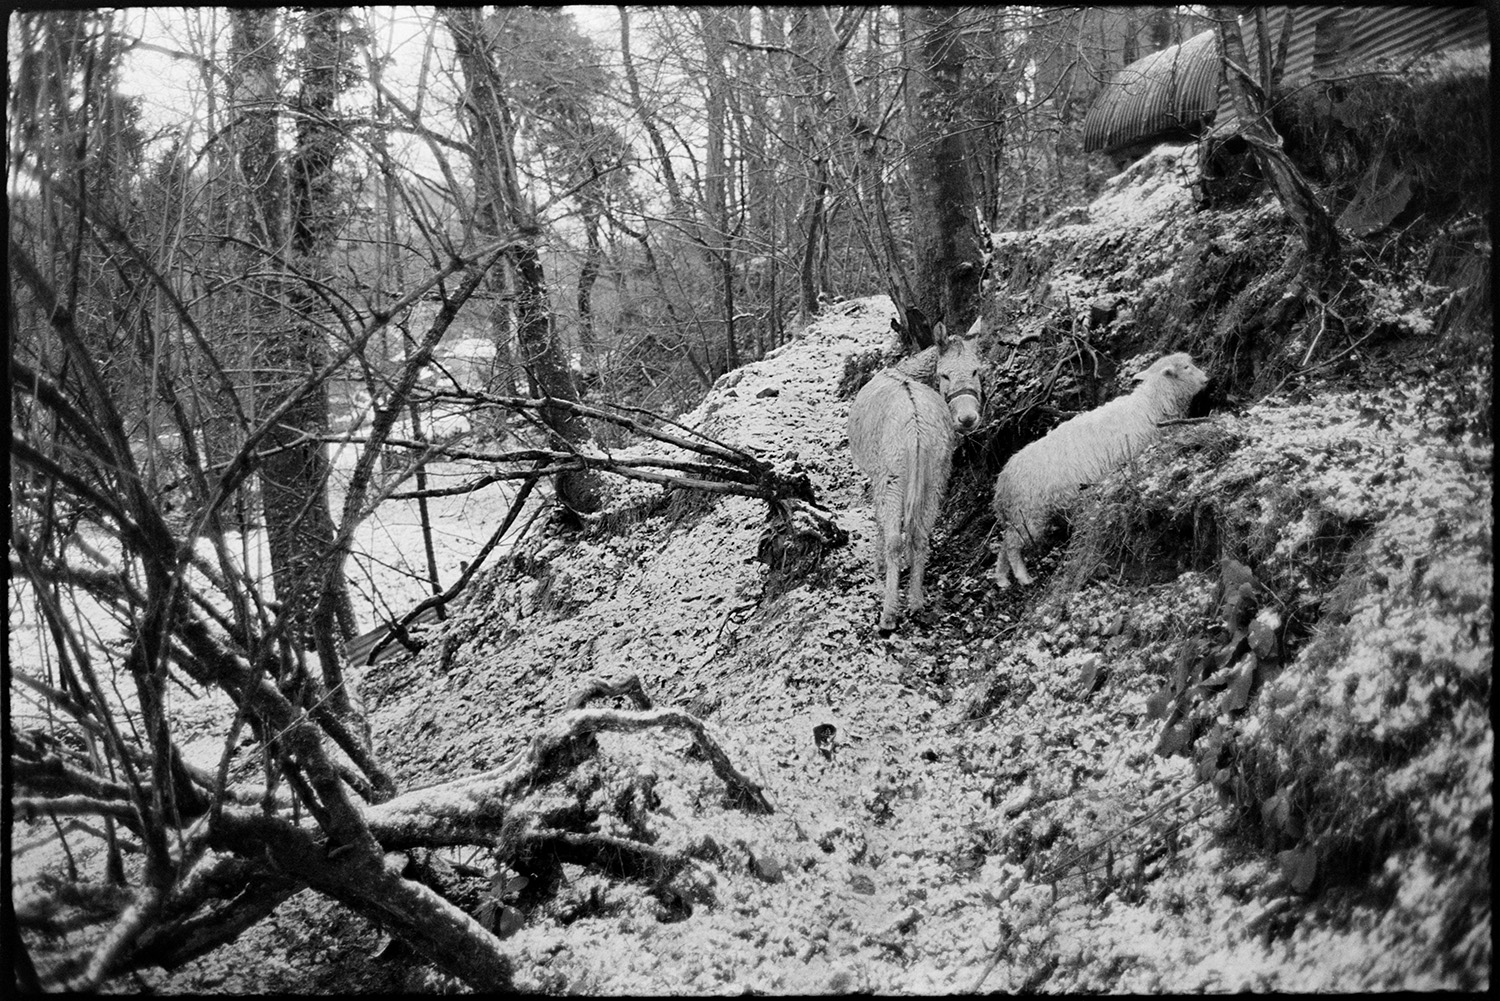 Snow, donkey and sheep scavenging in wood.
[A sheep and a donkey looking for food on a snow covered wooded hillside at Millhams, Dolton.]